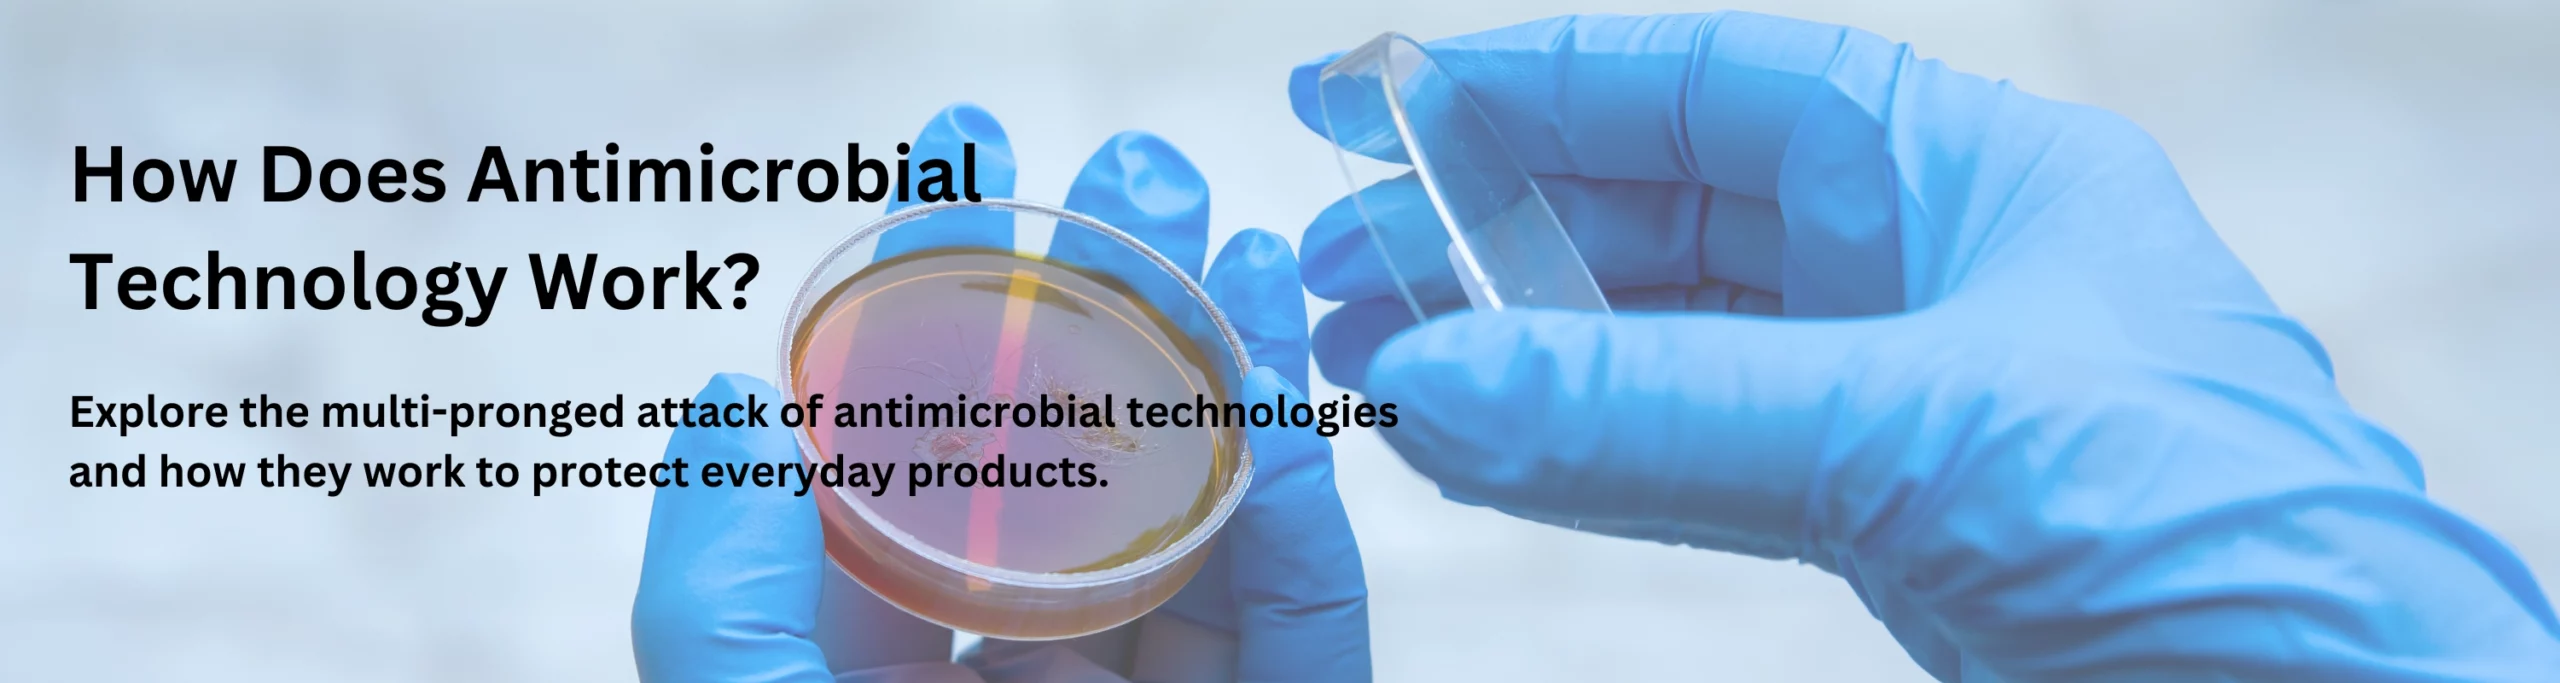 How Does Antimicrobial Technology Work